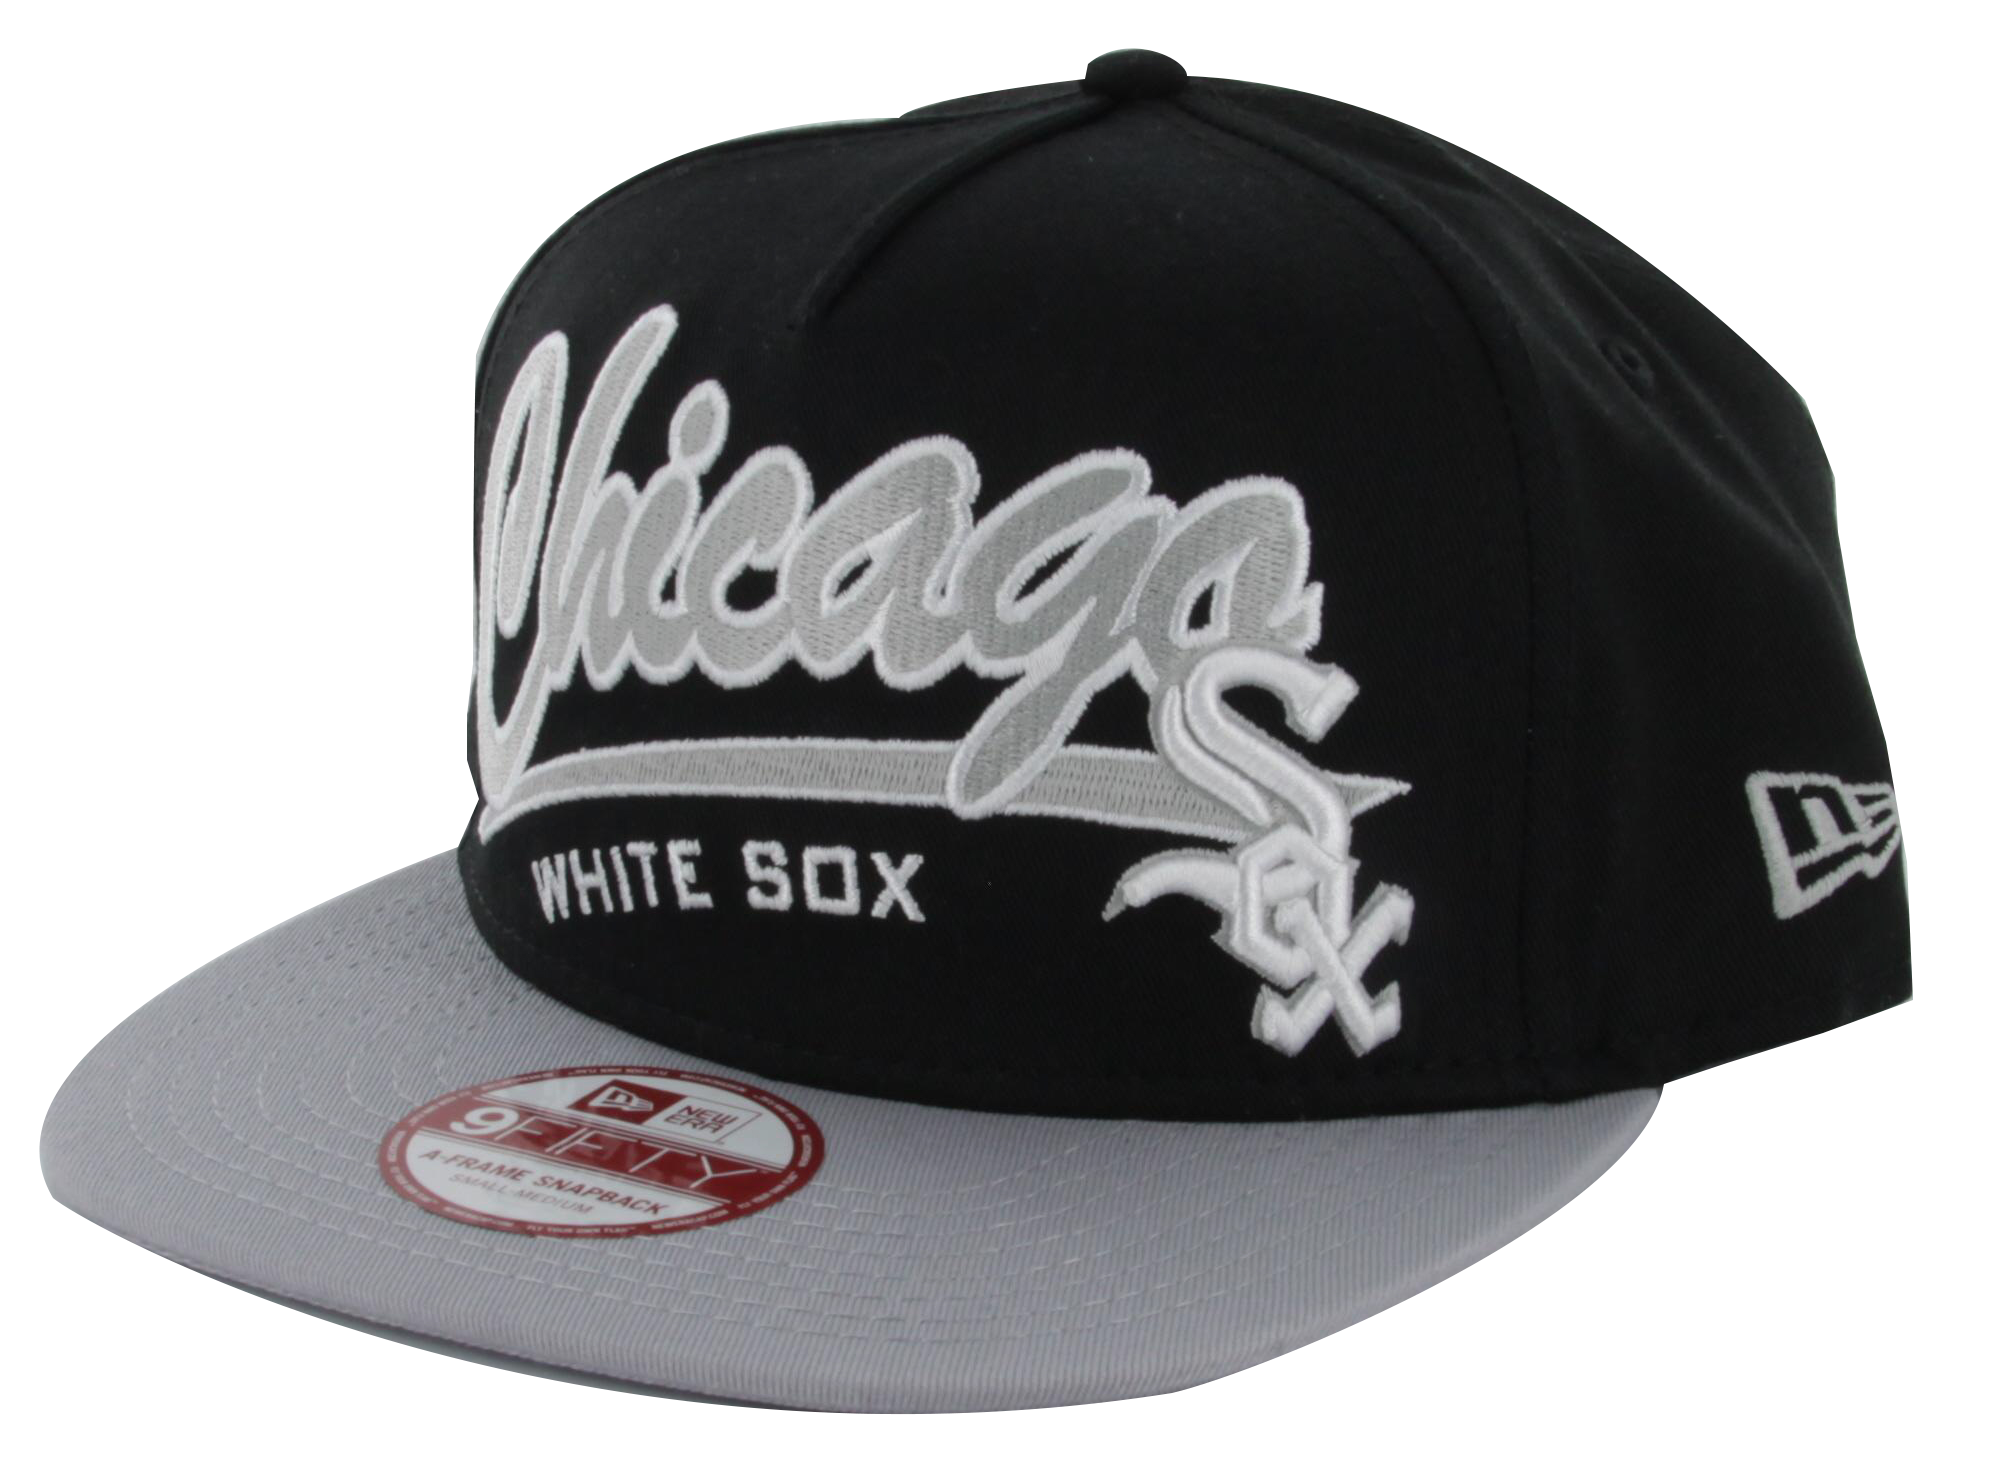 Chicago White Sox Cap PNG Clipart Background